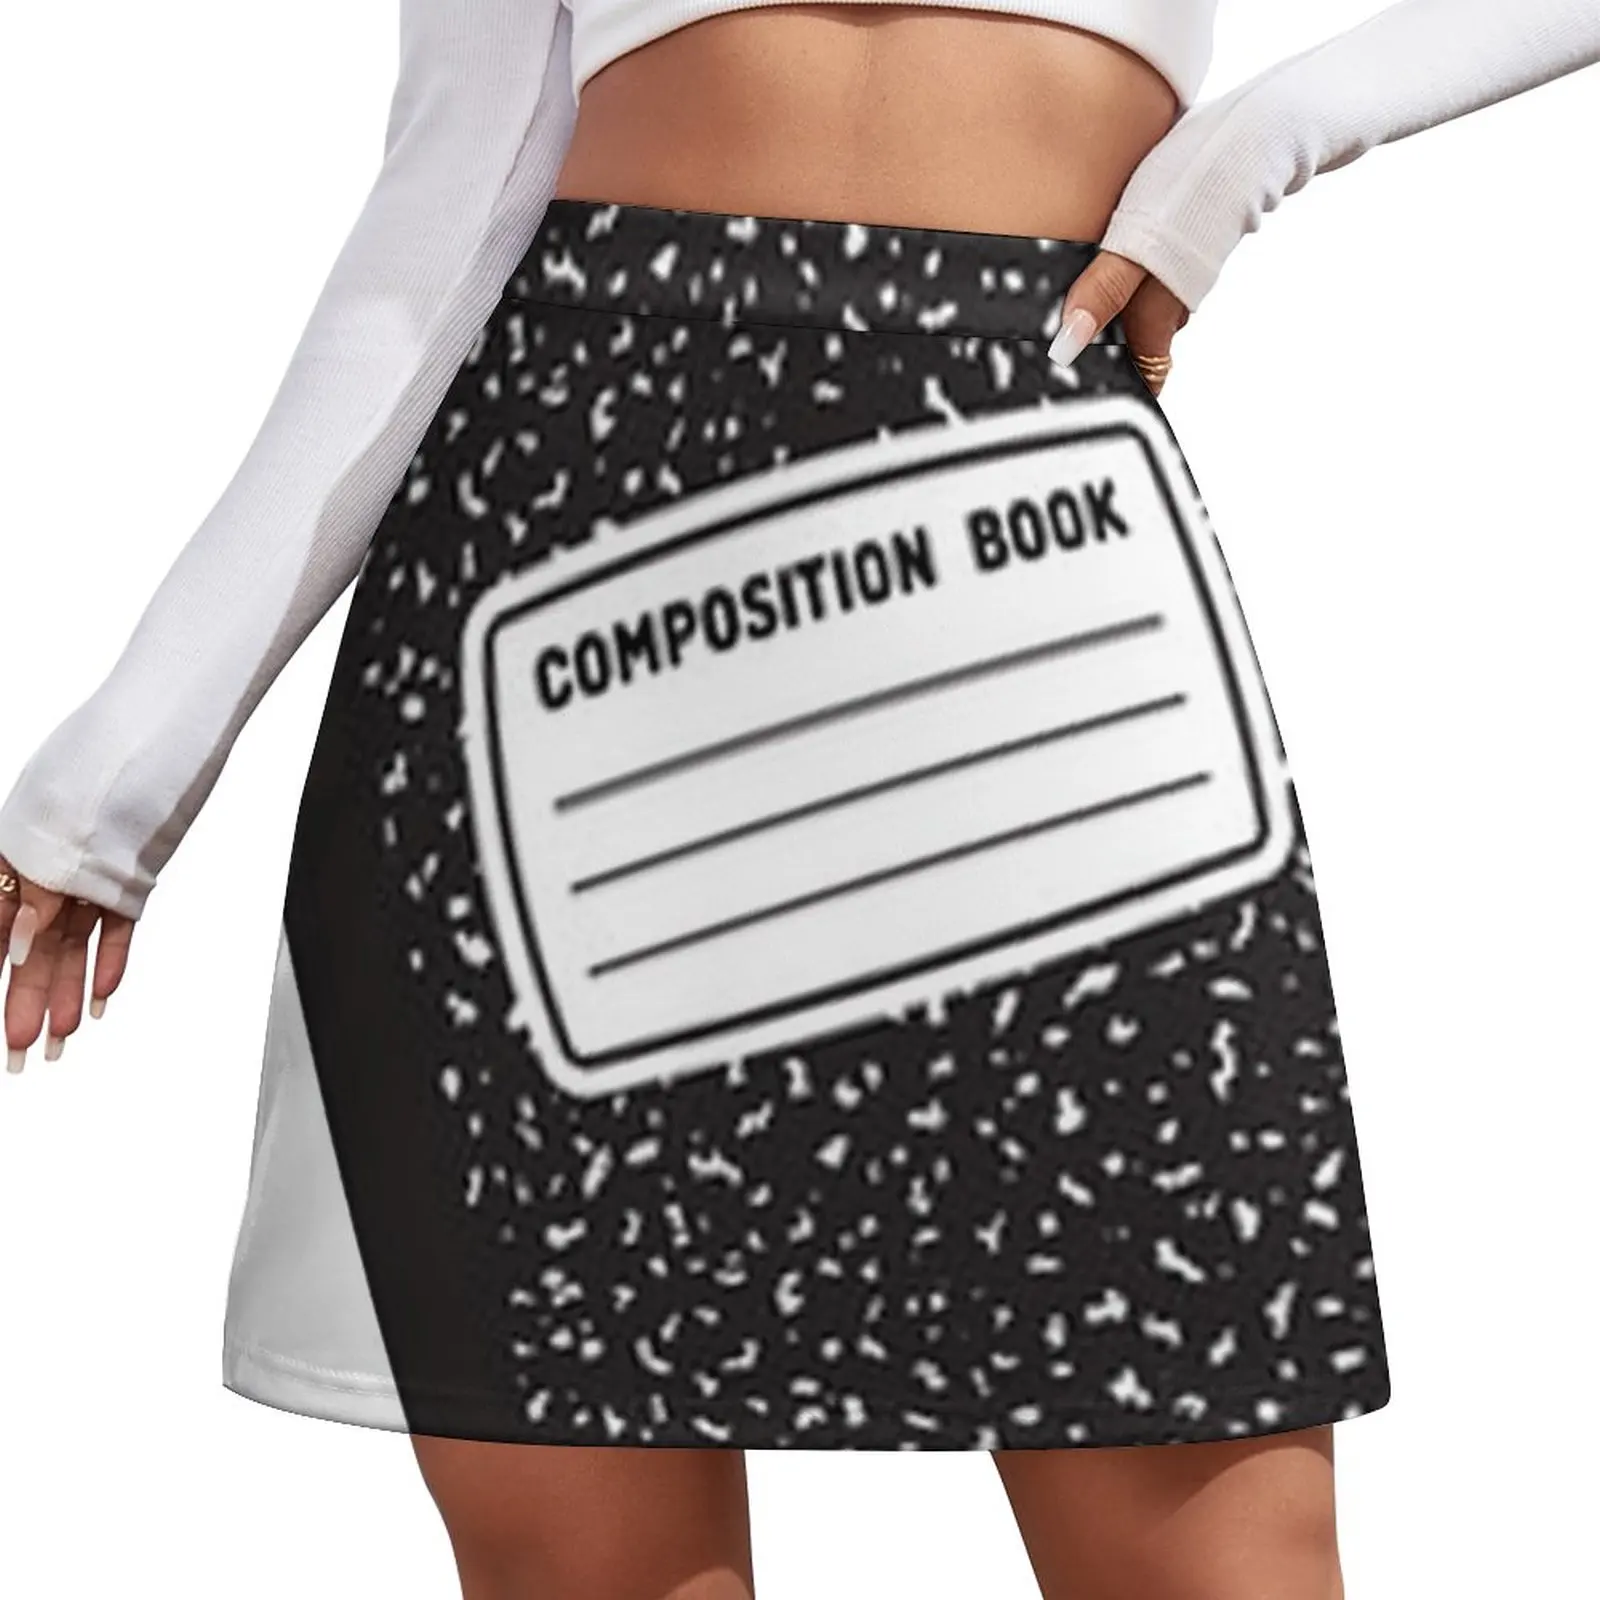 reusable groove free wiping practice chinese numbers writing sticker kids chinese copybook chinese calligraphy magic copy book Writing - Composition Book Mini Skirt midi skirt for women Skirt satin